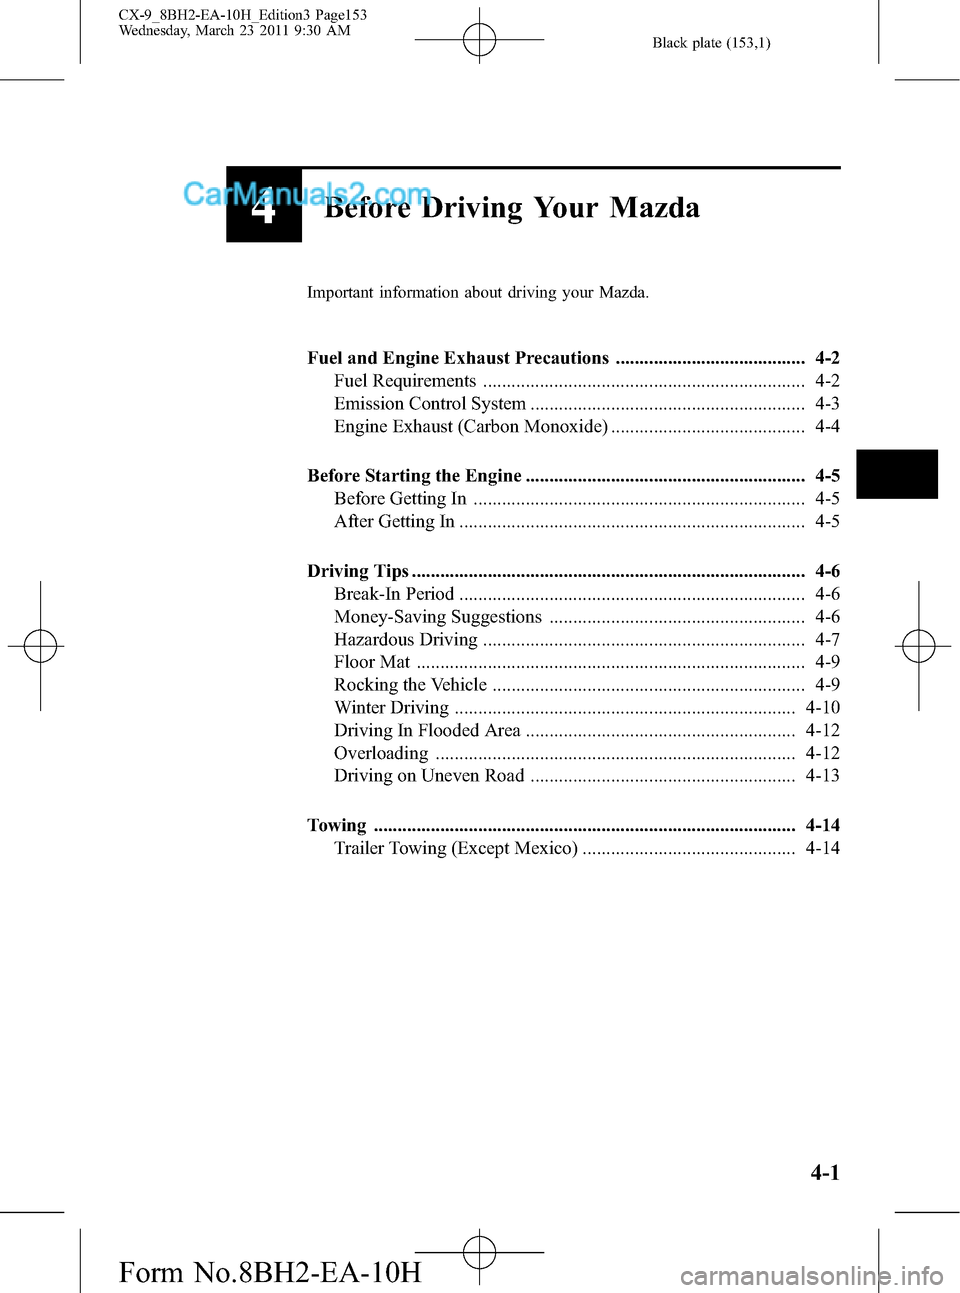 MAZDA MODEL CX-9 2011  Owners Manual (in English) Black plate (153,1)
4Before Driving Your Mazda
Important information about driving your Mazda.
Fuel and Engine Exhaust Precautions ........................................ 4-2
Fuel Requirements ......